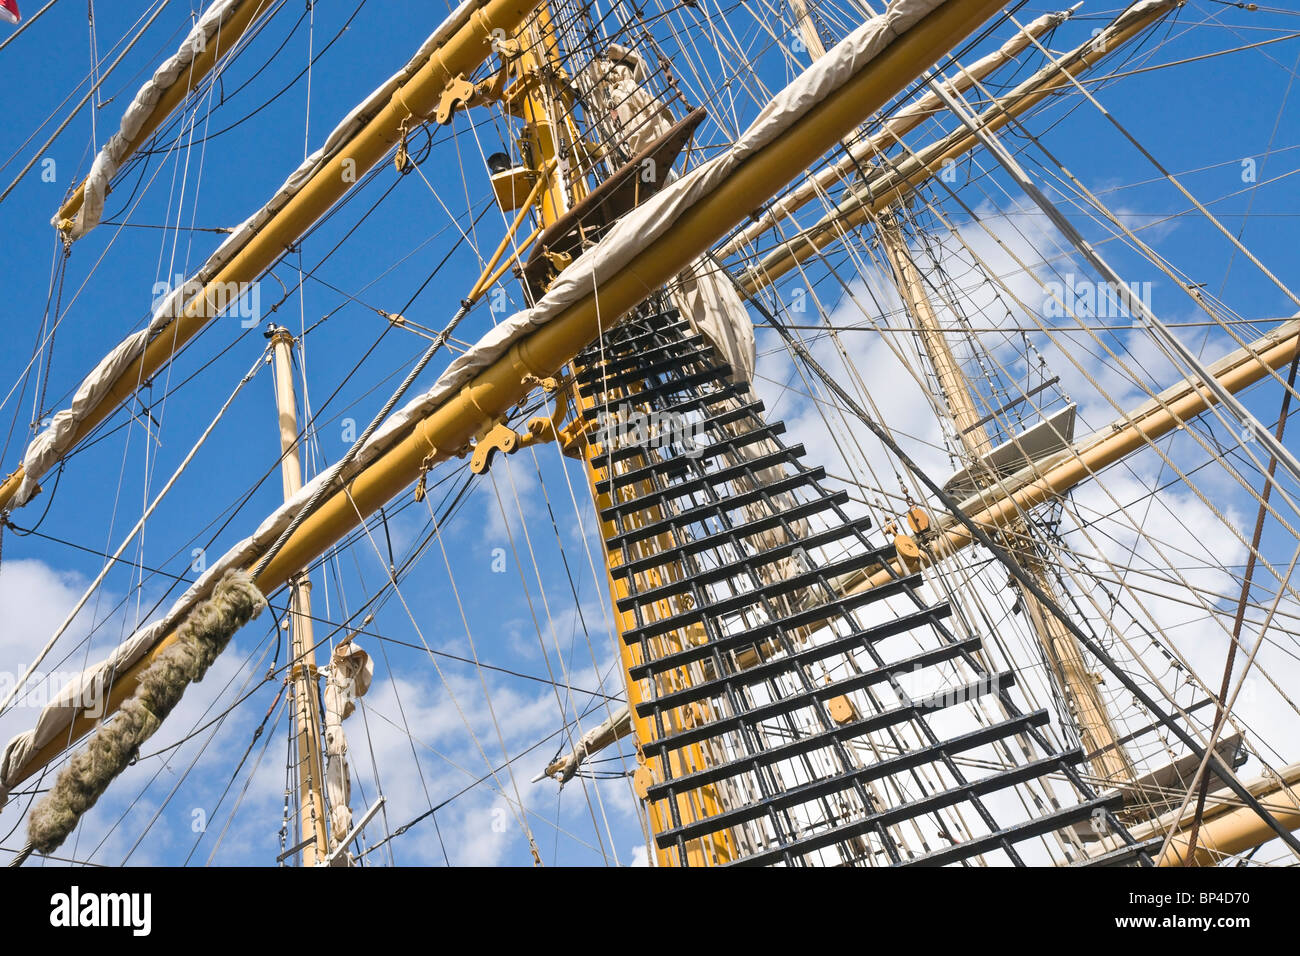 The foremast and yards (spars) on a barquentine rigged sailing ship. Stock Photo